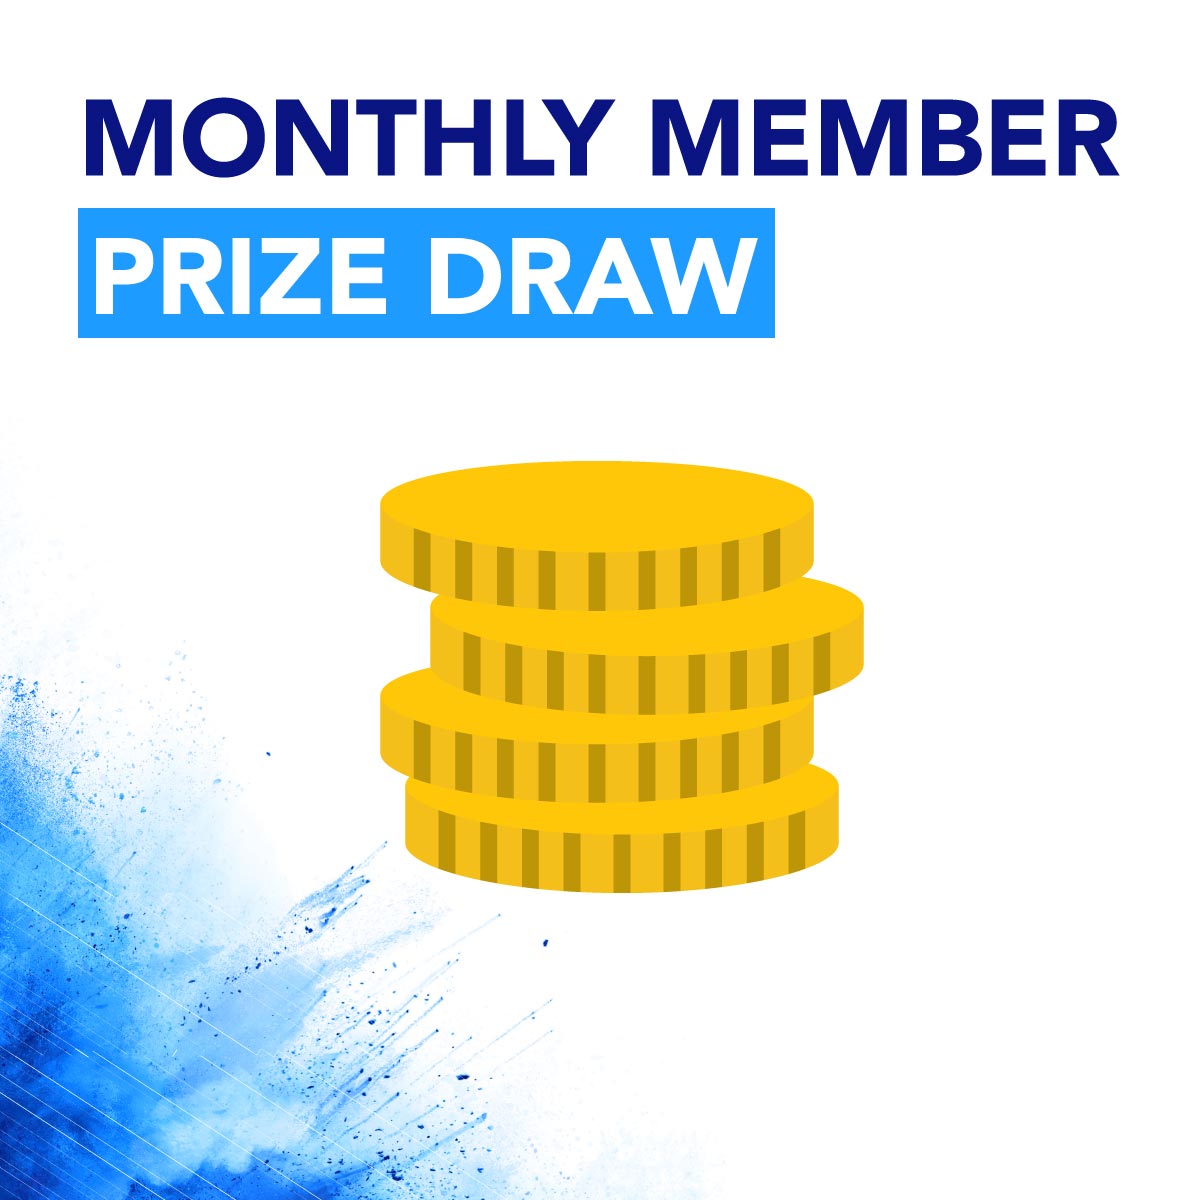 Monthly Member Prize Draw Poster